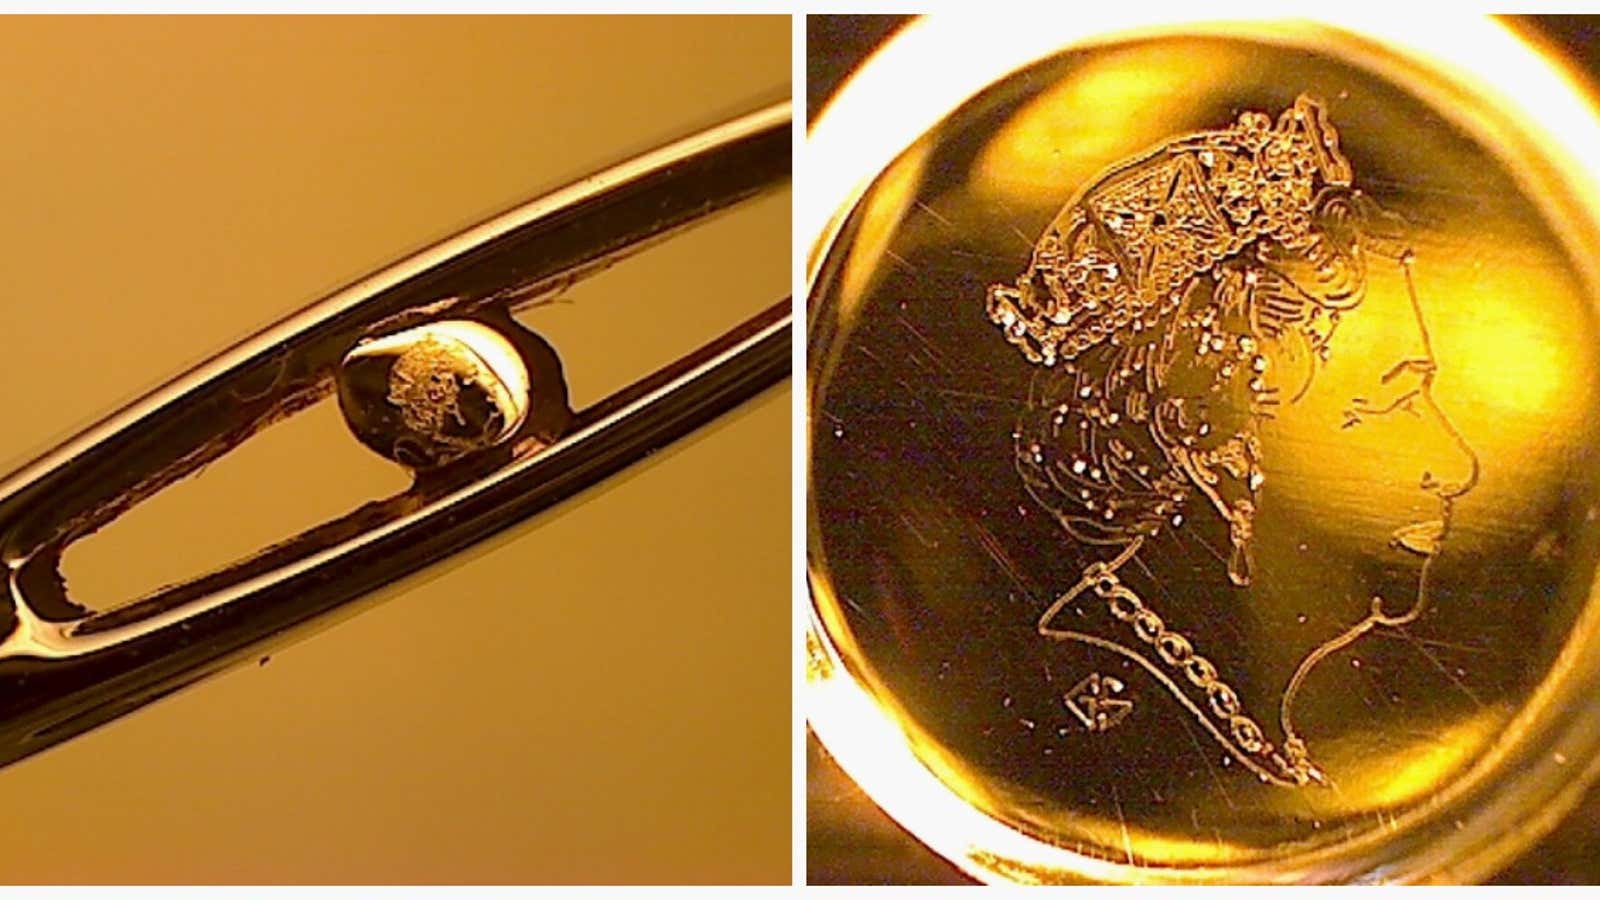 A portrait of Queen Elizabeth II, carved on a speck of gold framed in the eye of a needle.